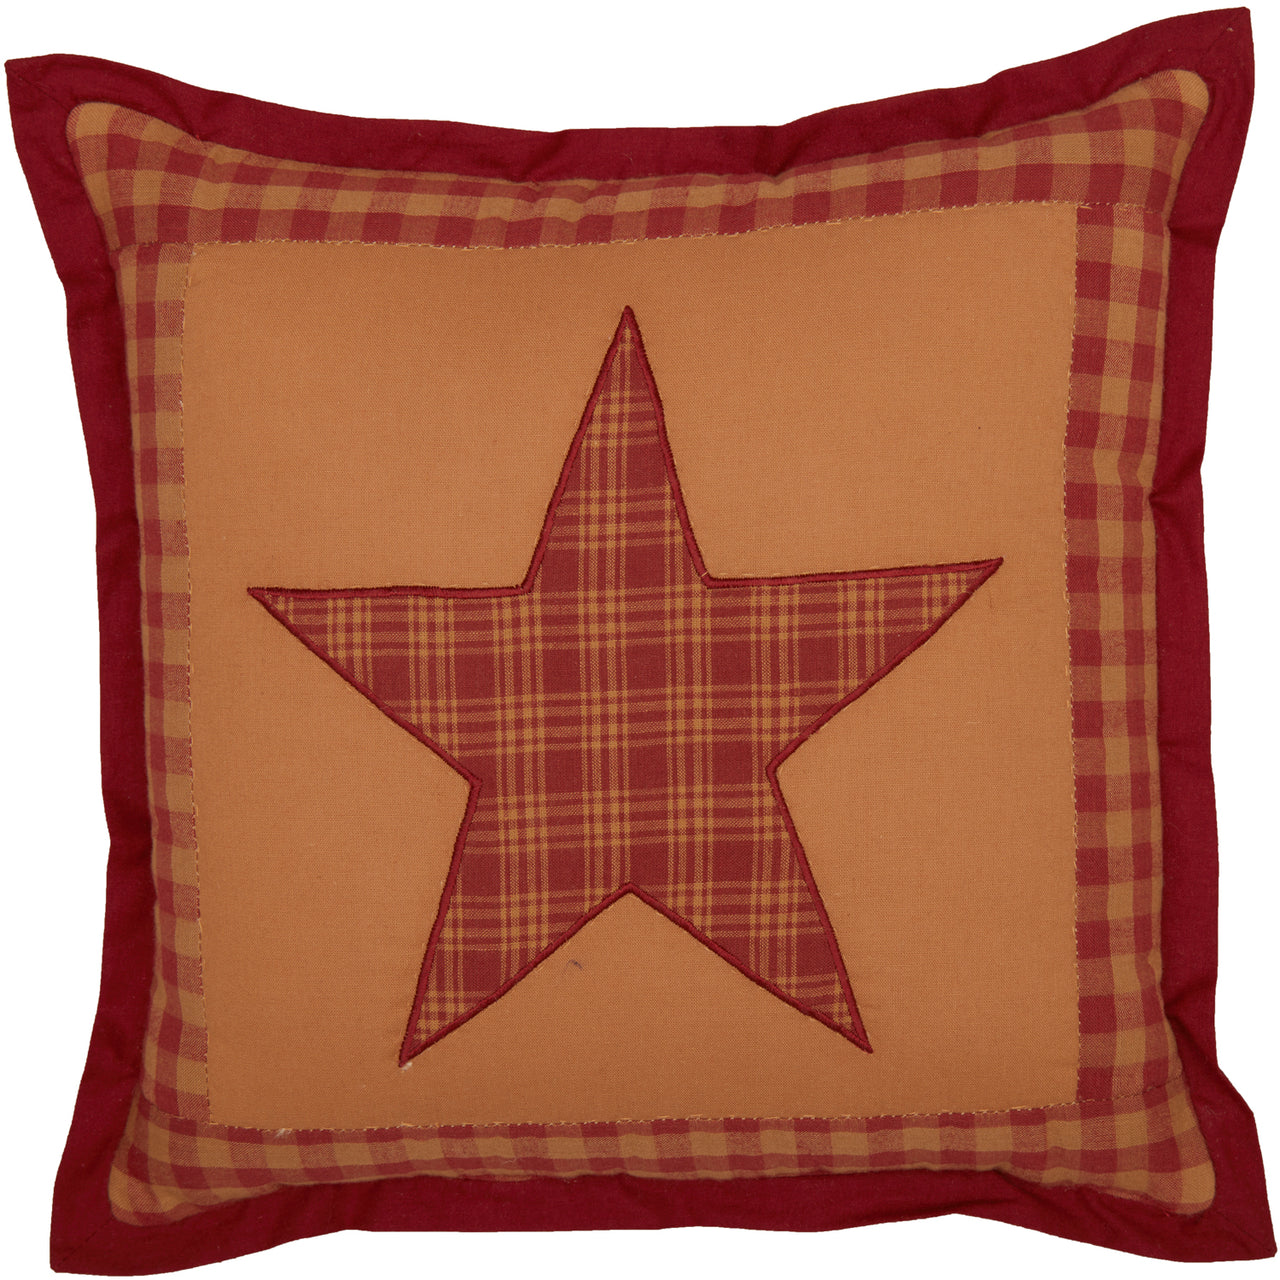 Ninepatch Star Quilted Pillow 12x12 VHC Brands